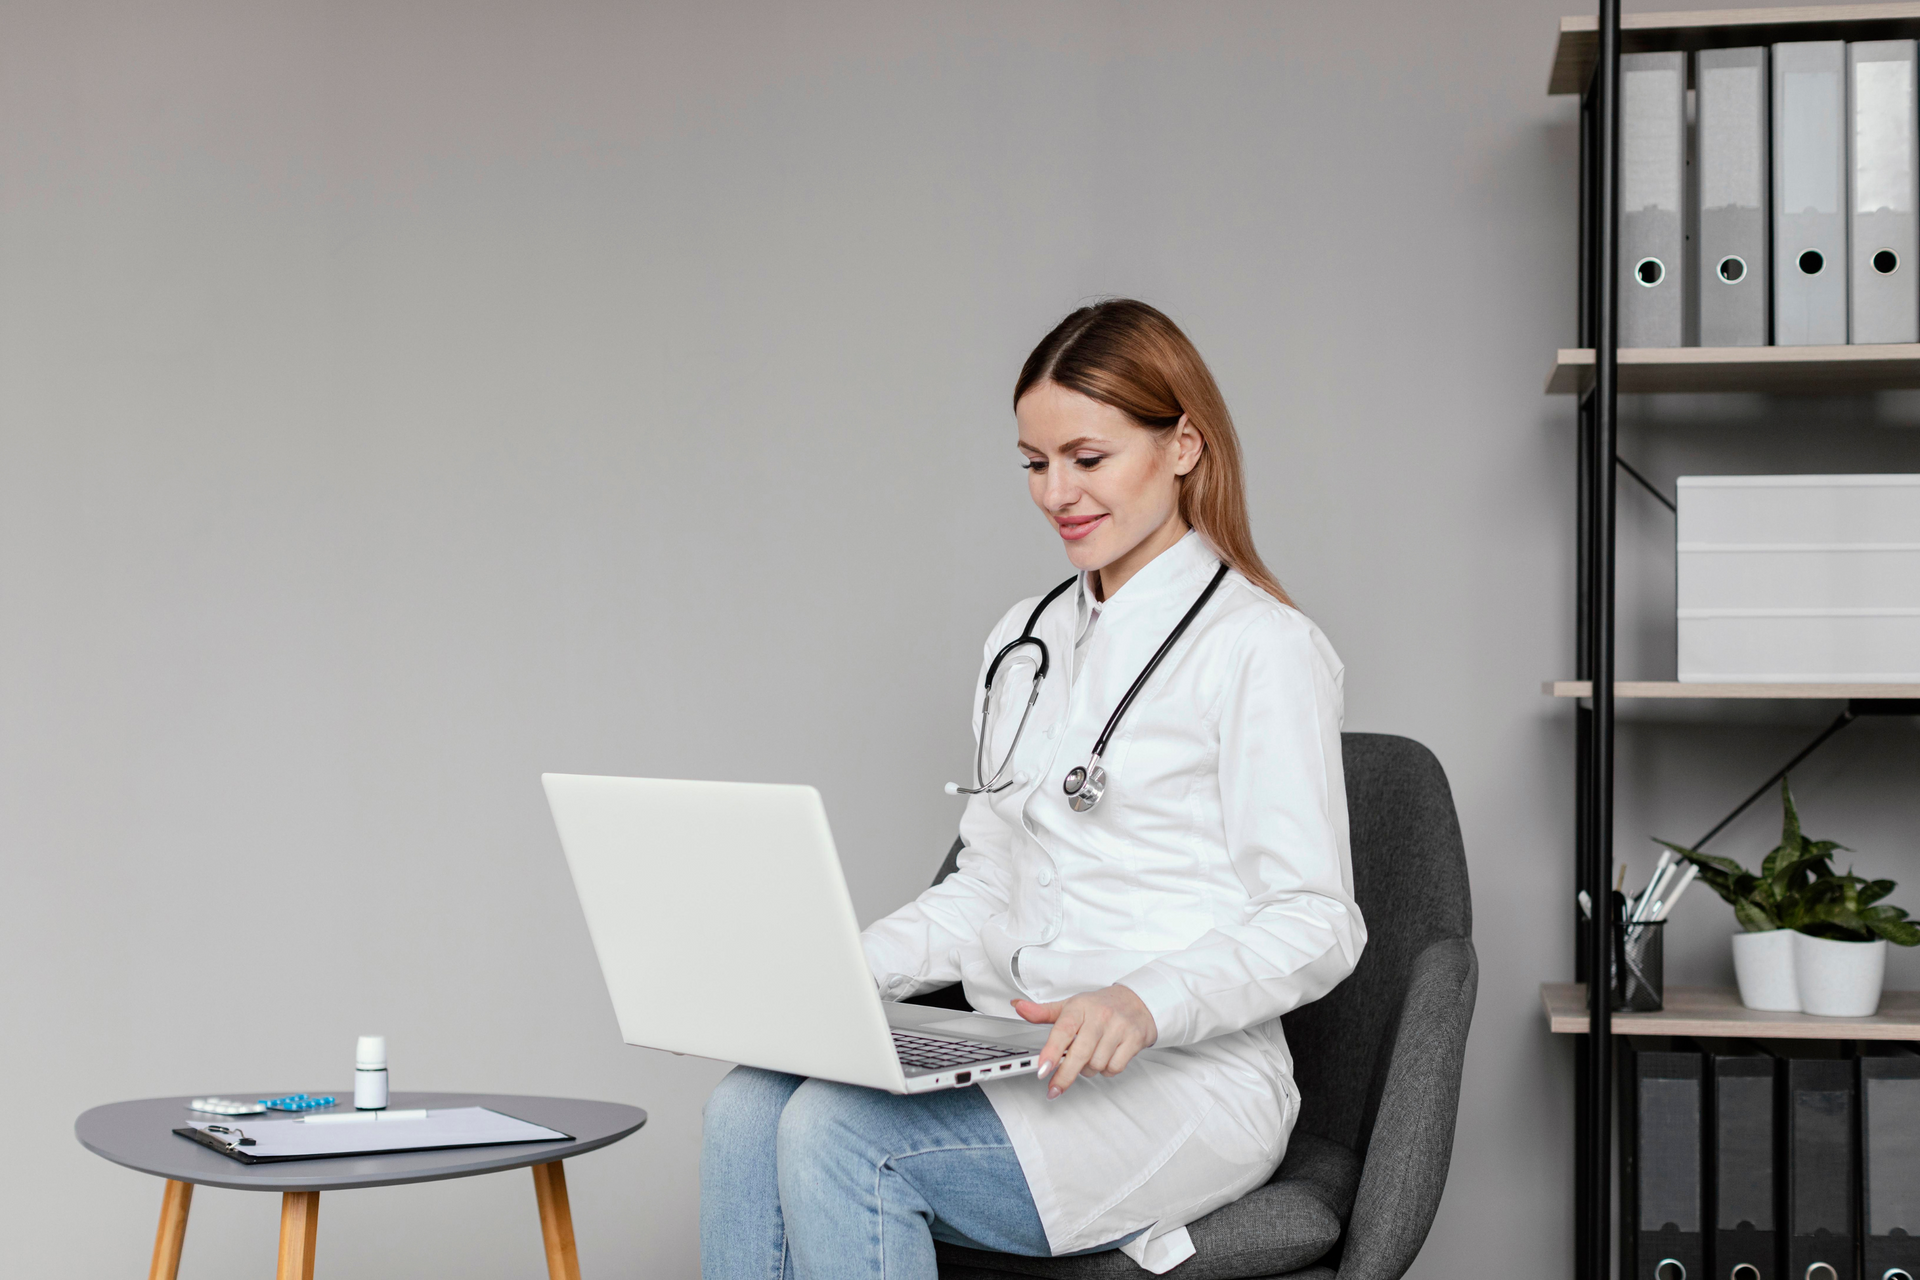 A doctor sitting on a chair with a laptop on her lap.